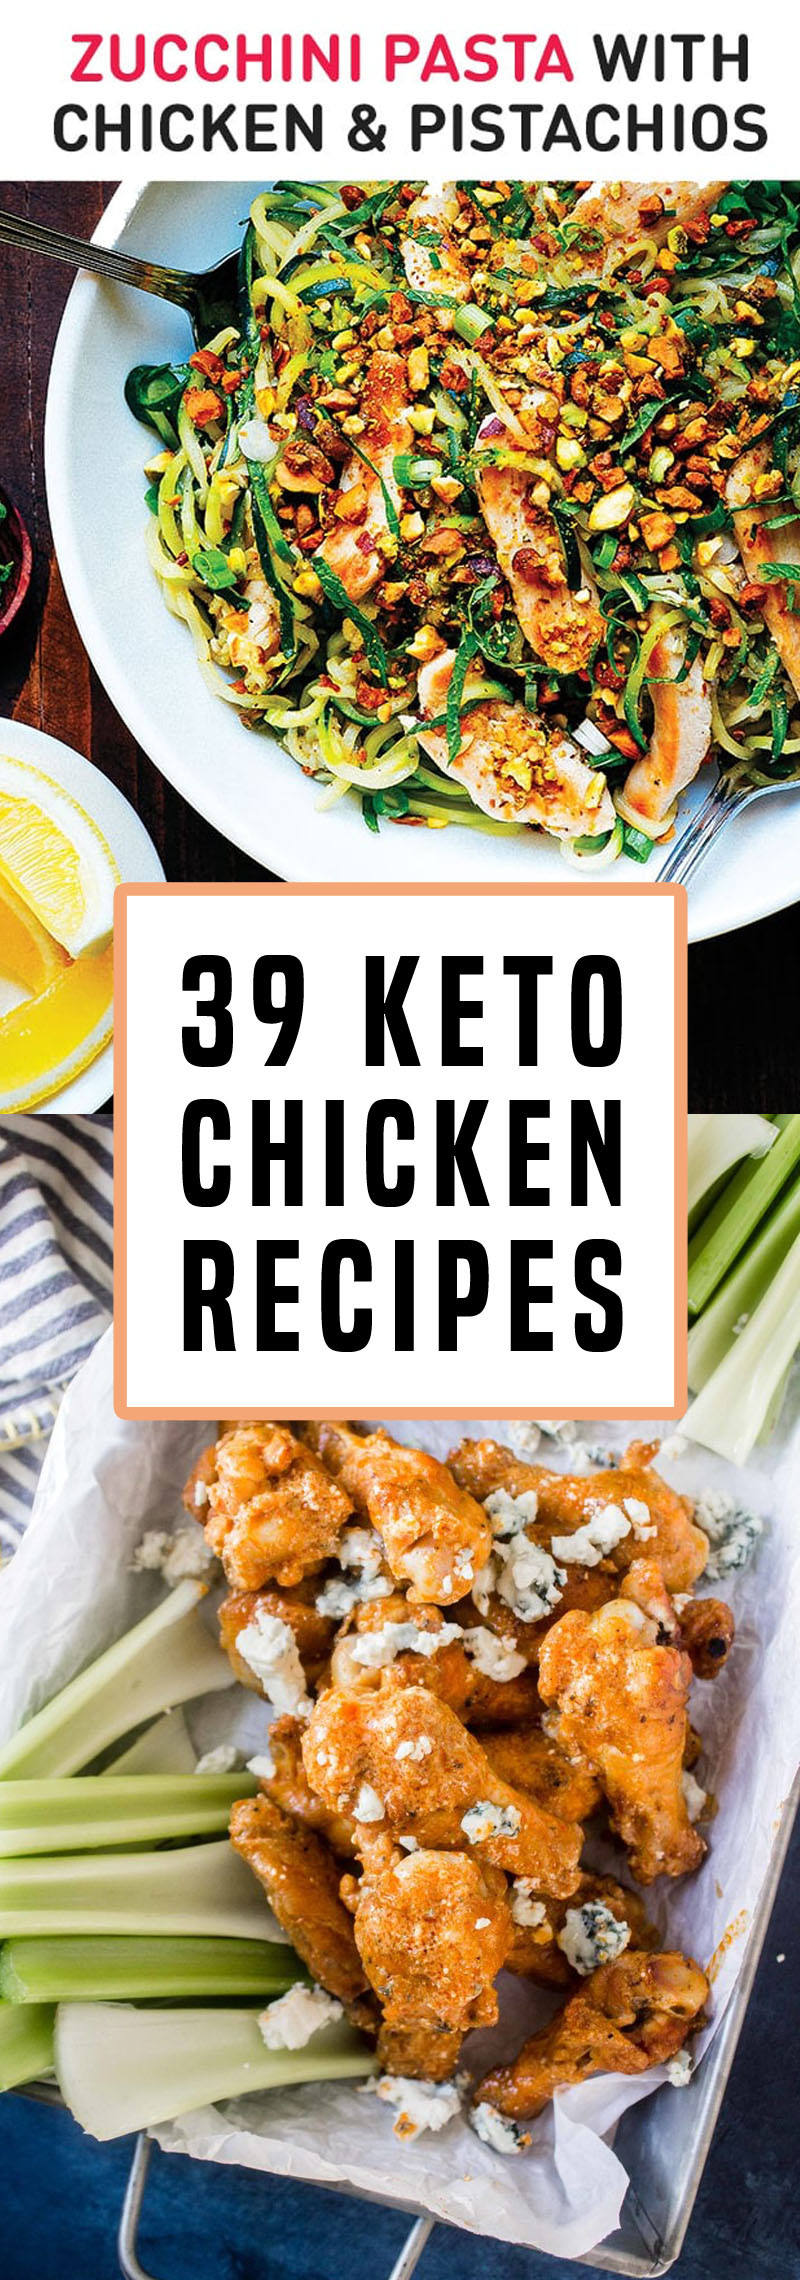 Chicken Keto Dishes
 39 Keto Chicken Recipes That Are Super High Protein & Low